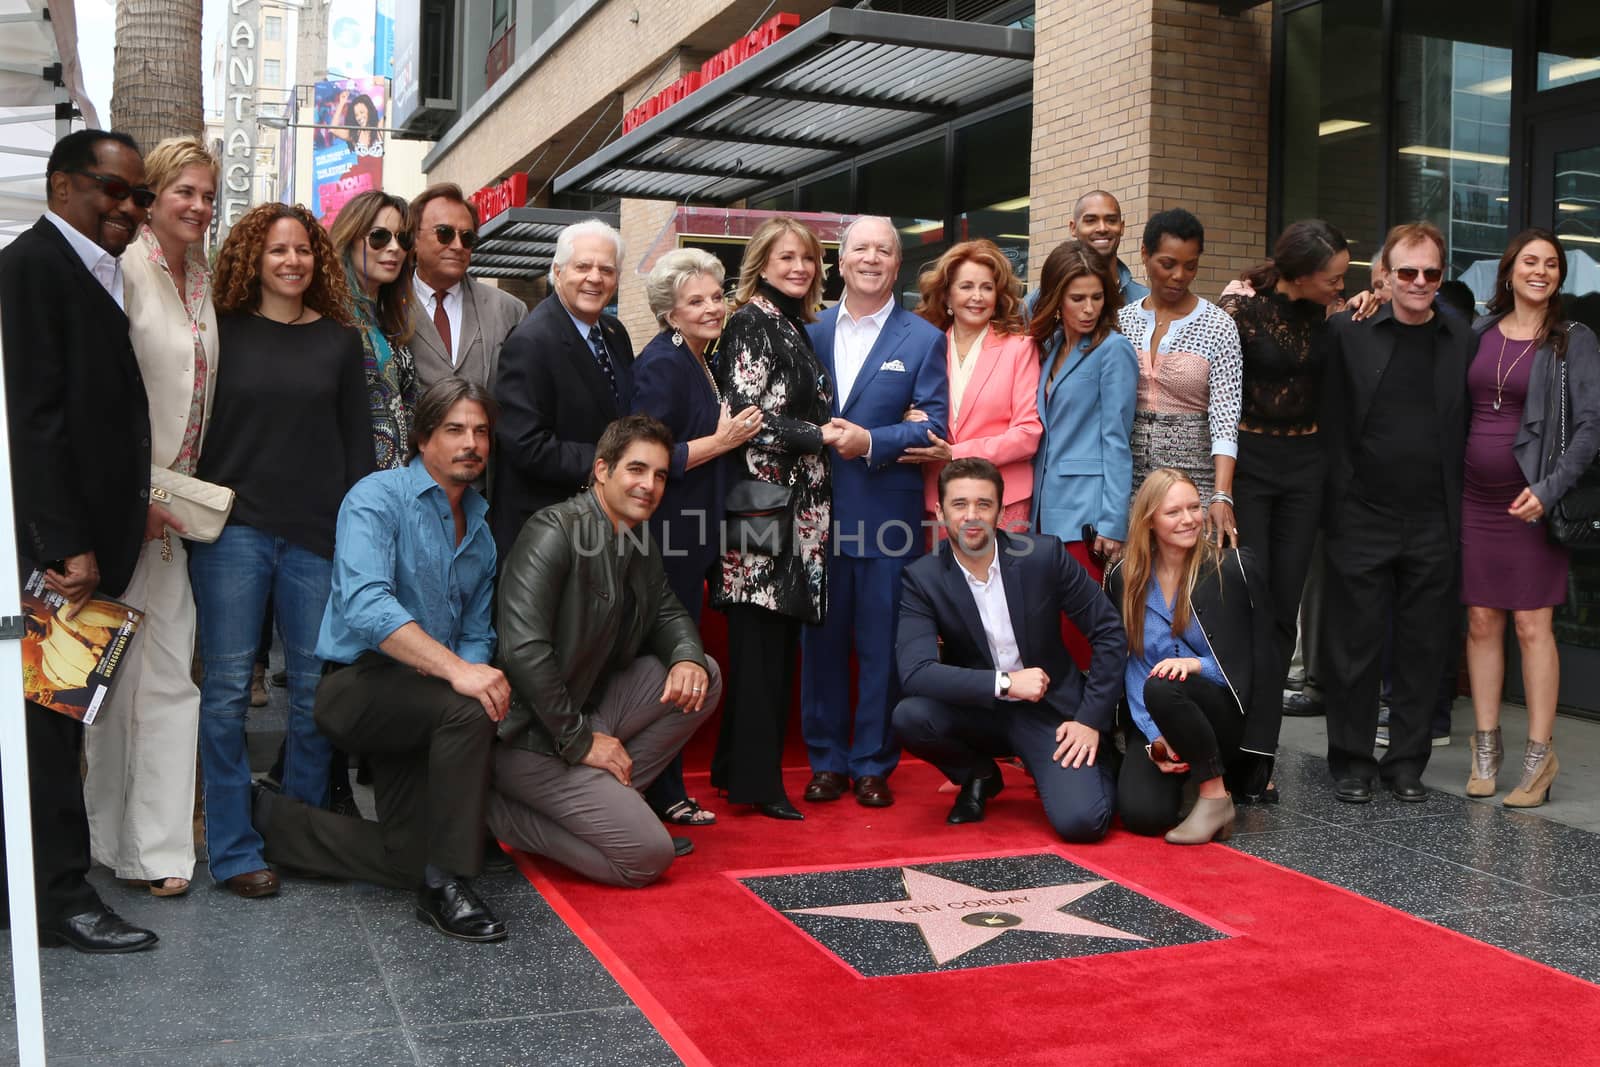 Days of Our Lives Cast Members, Ken Corday
at the Ken Corday Star Ceremony, Hollywood Walk of Fame, Hollywood, CA 05-17-17/ImageCollect by ImageCollect